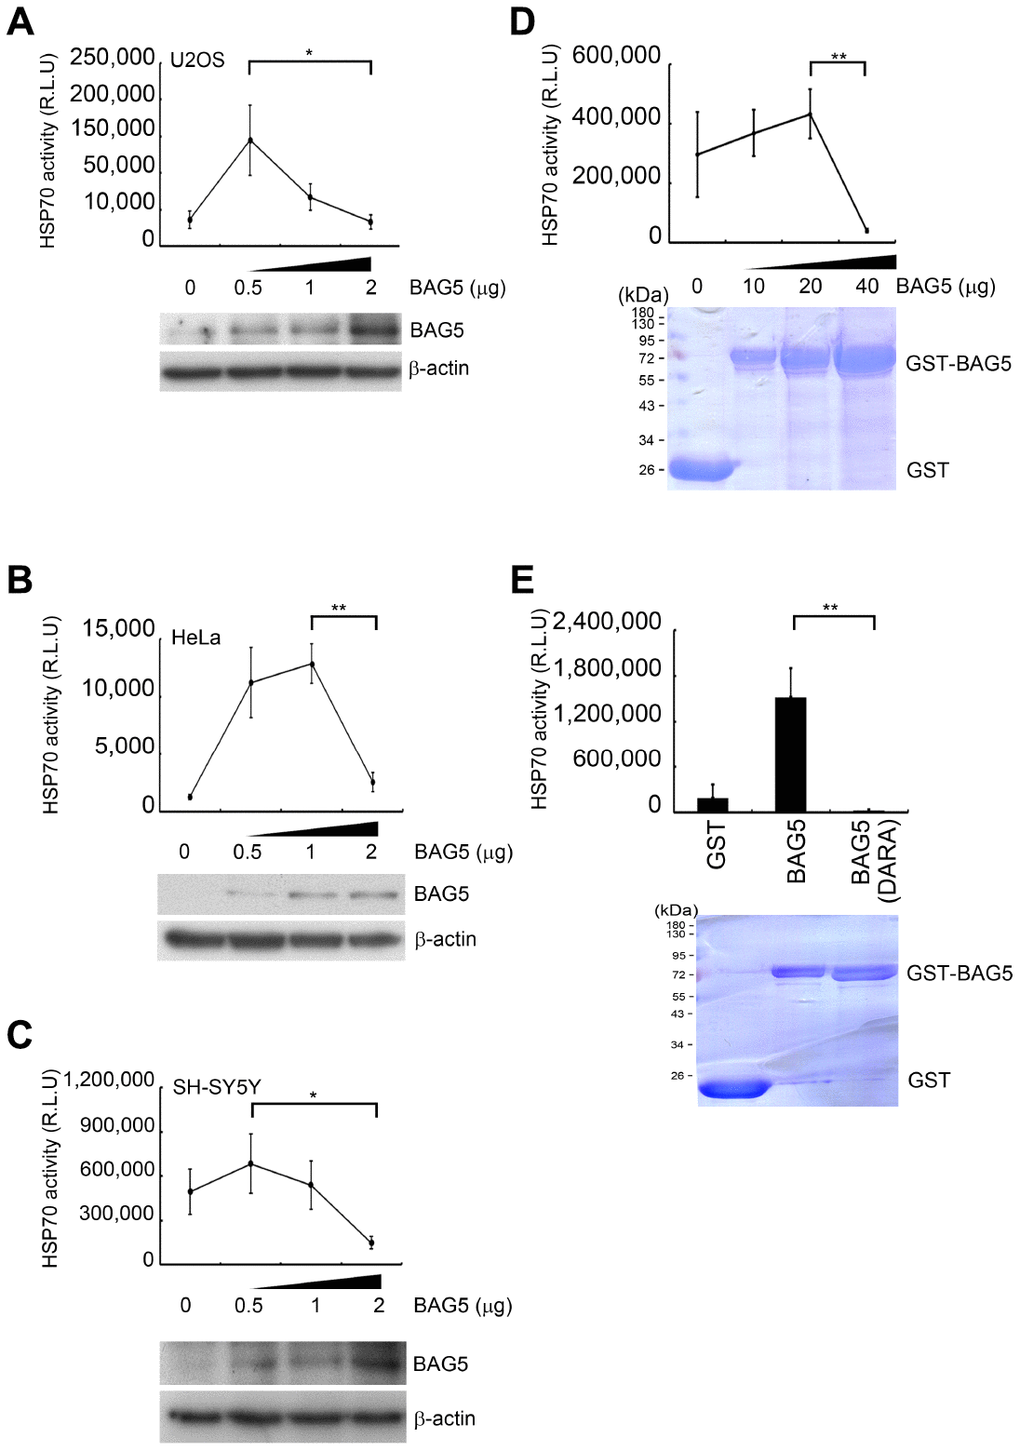 Overexpressed BAG5 may result in loss of its function to promote HSP70 activity. (A–C) U2OS, HeLa, and SH-SY5Y cells were transfected with various amounts of a BAG5-expressing plasmid (pCMV-Tag2B-BAG5). Expression levels of BAG5 were detected by Western blotting. β-Actin served as an internal control. (D–E) Recombinant GST fusion BAG5 and BAG5 (DARA) protein were purified and stained with Coomassie blue. The HSP70-mediated refolding activity was examined with denatured firefly luciferase in the presence of different concentrations of BAG5 (Student’s t-test; *, p p 